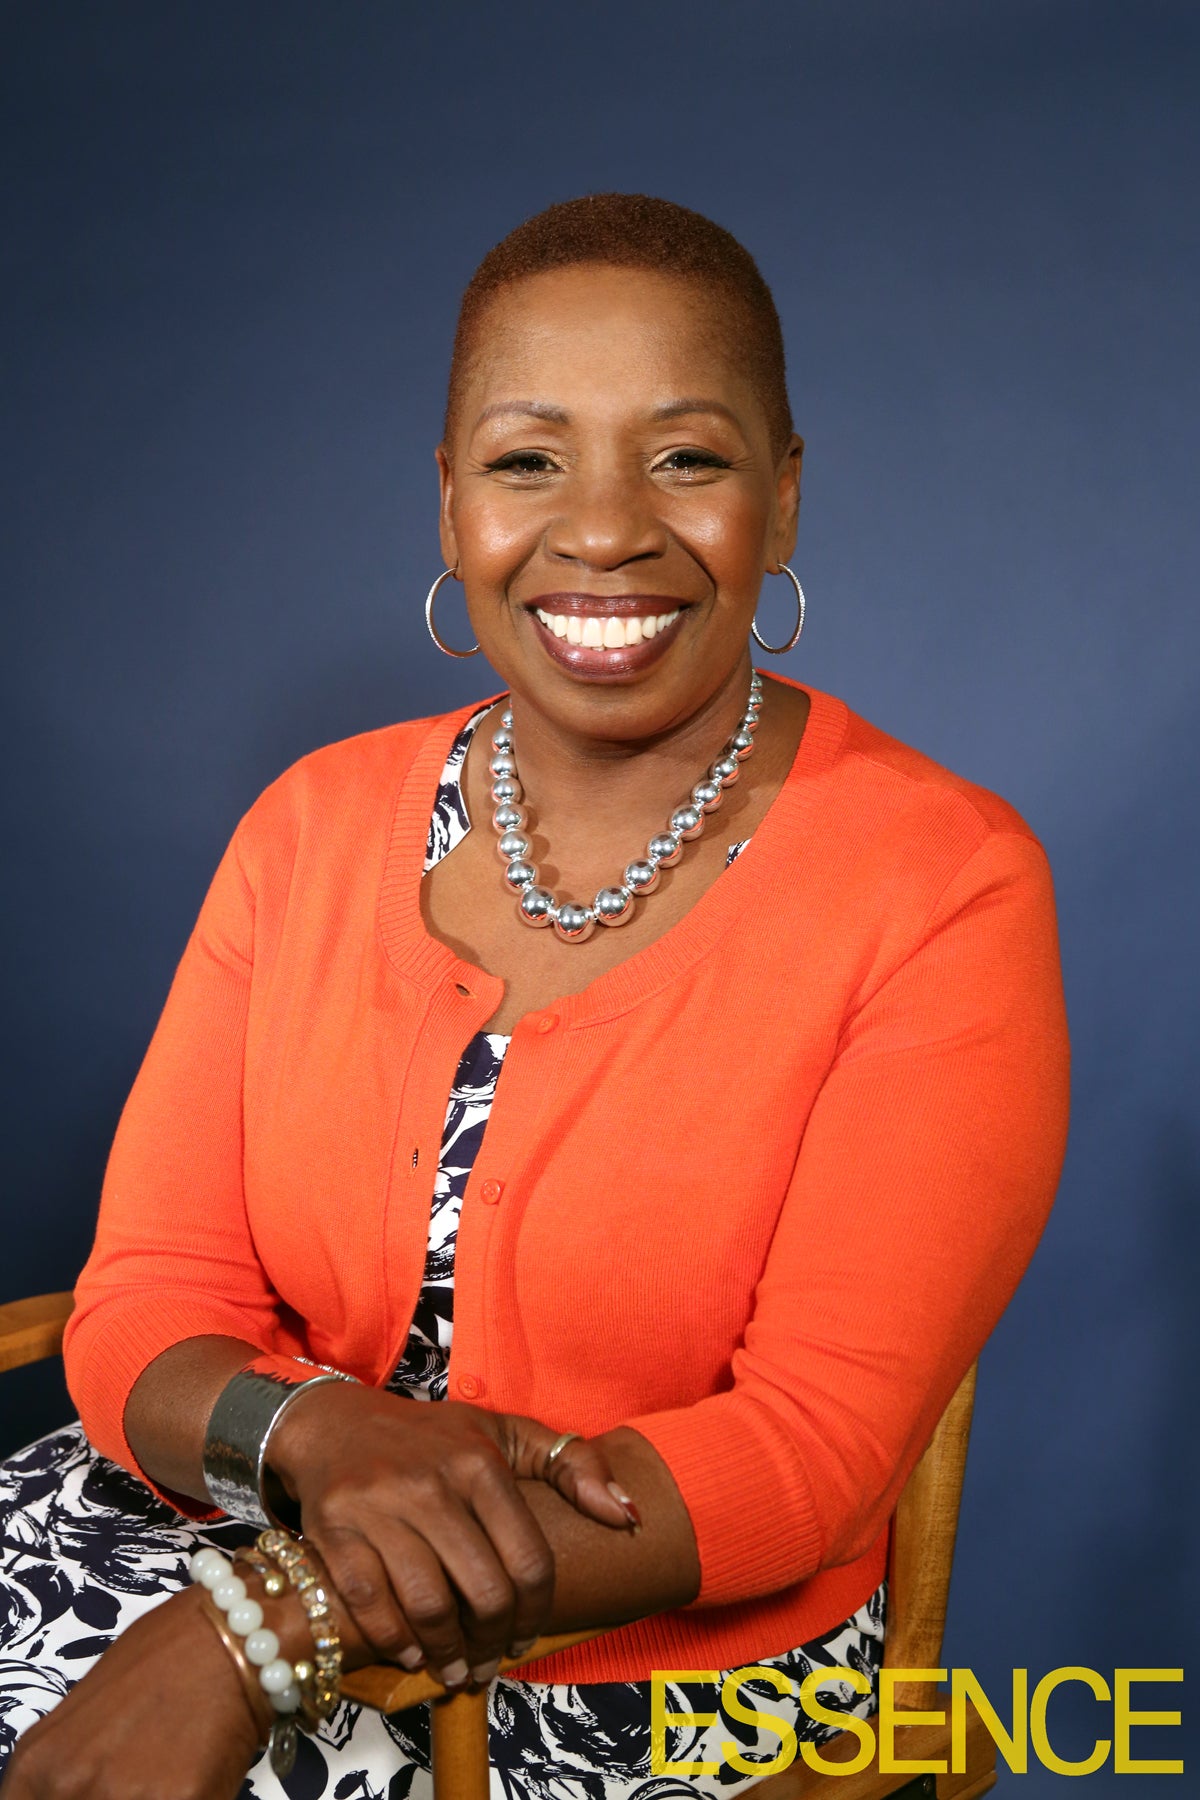 EXCLUSIVE: Iyanla Vanzant Dishes on <i>Fix My Life</i>, Growth, and Her Mission for Viewers